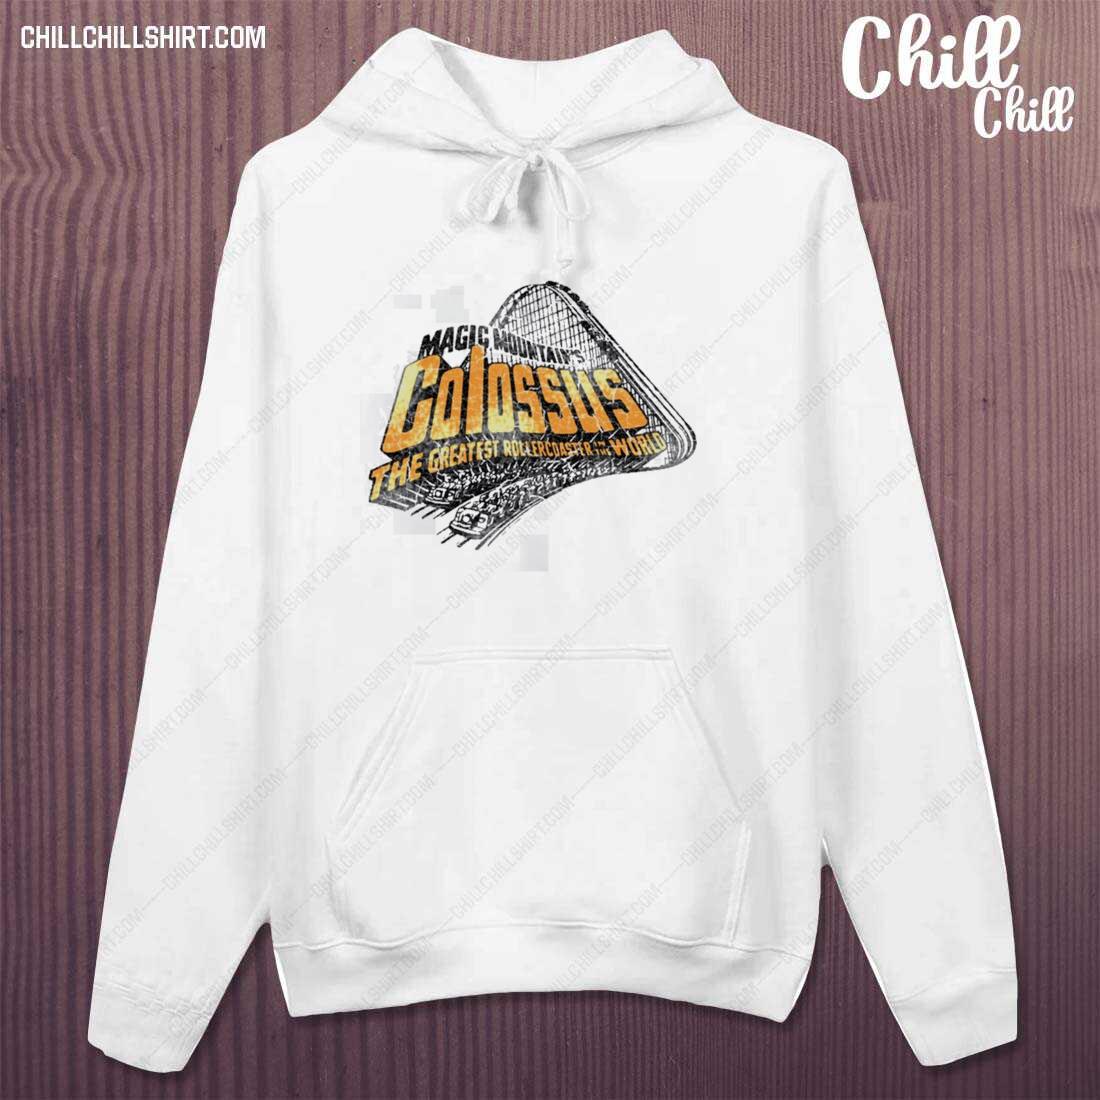 Official magic Mountain Colossus Marvel T-s hoodie